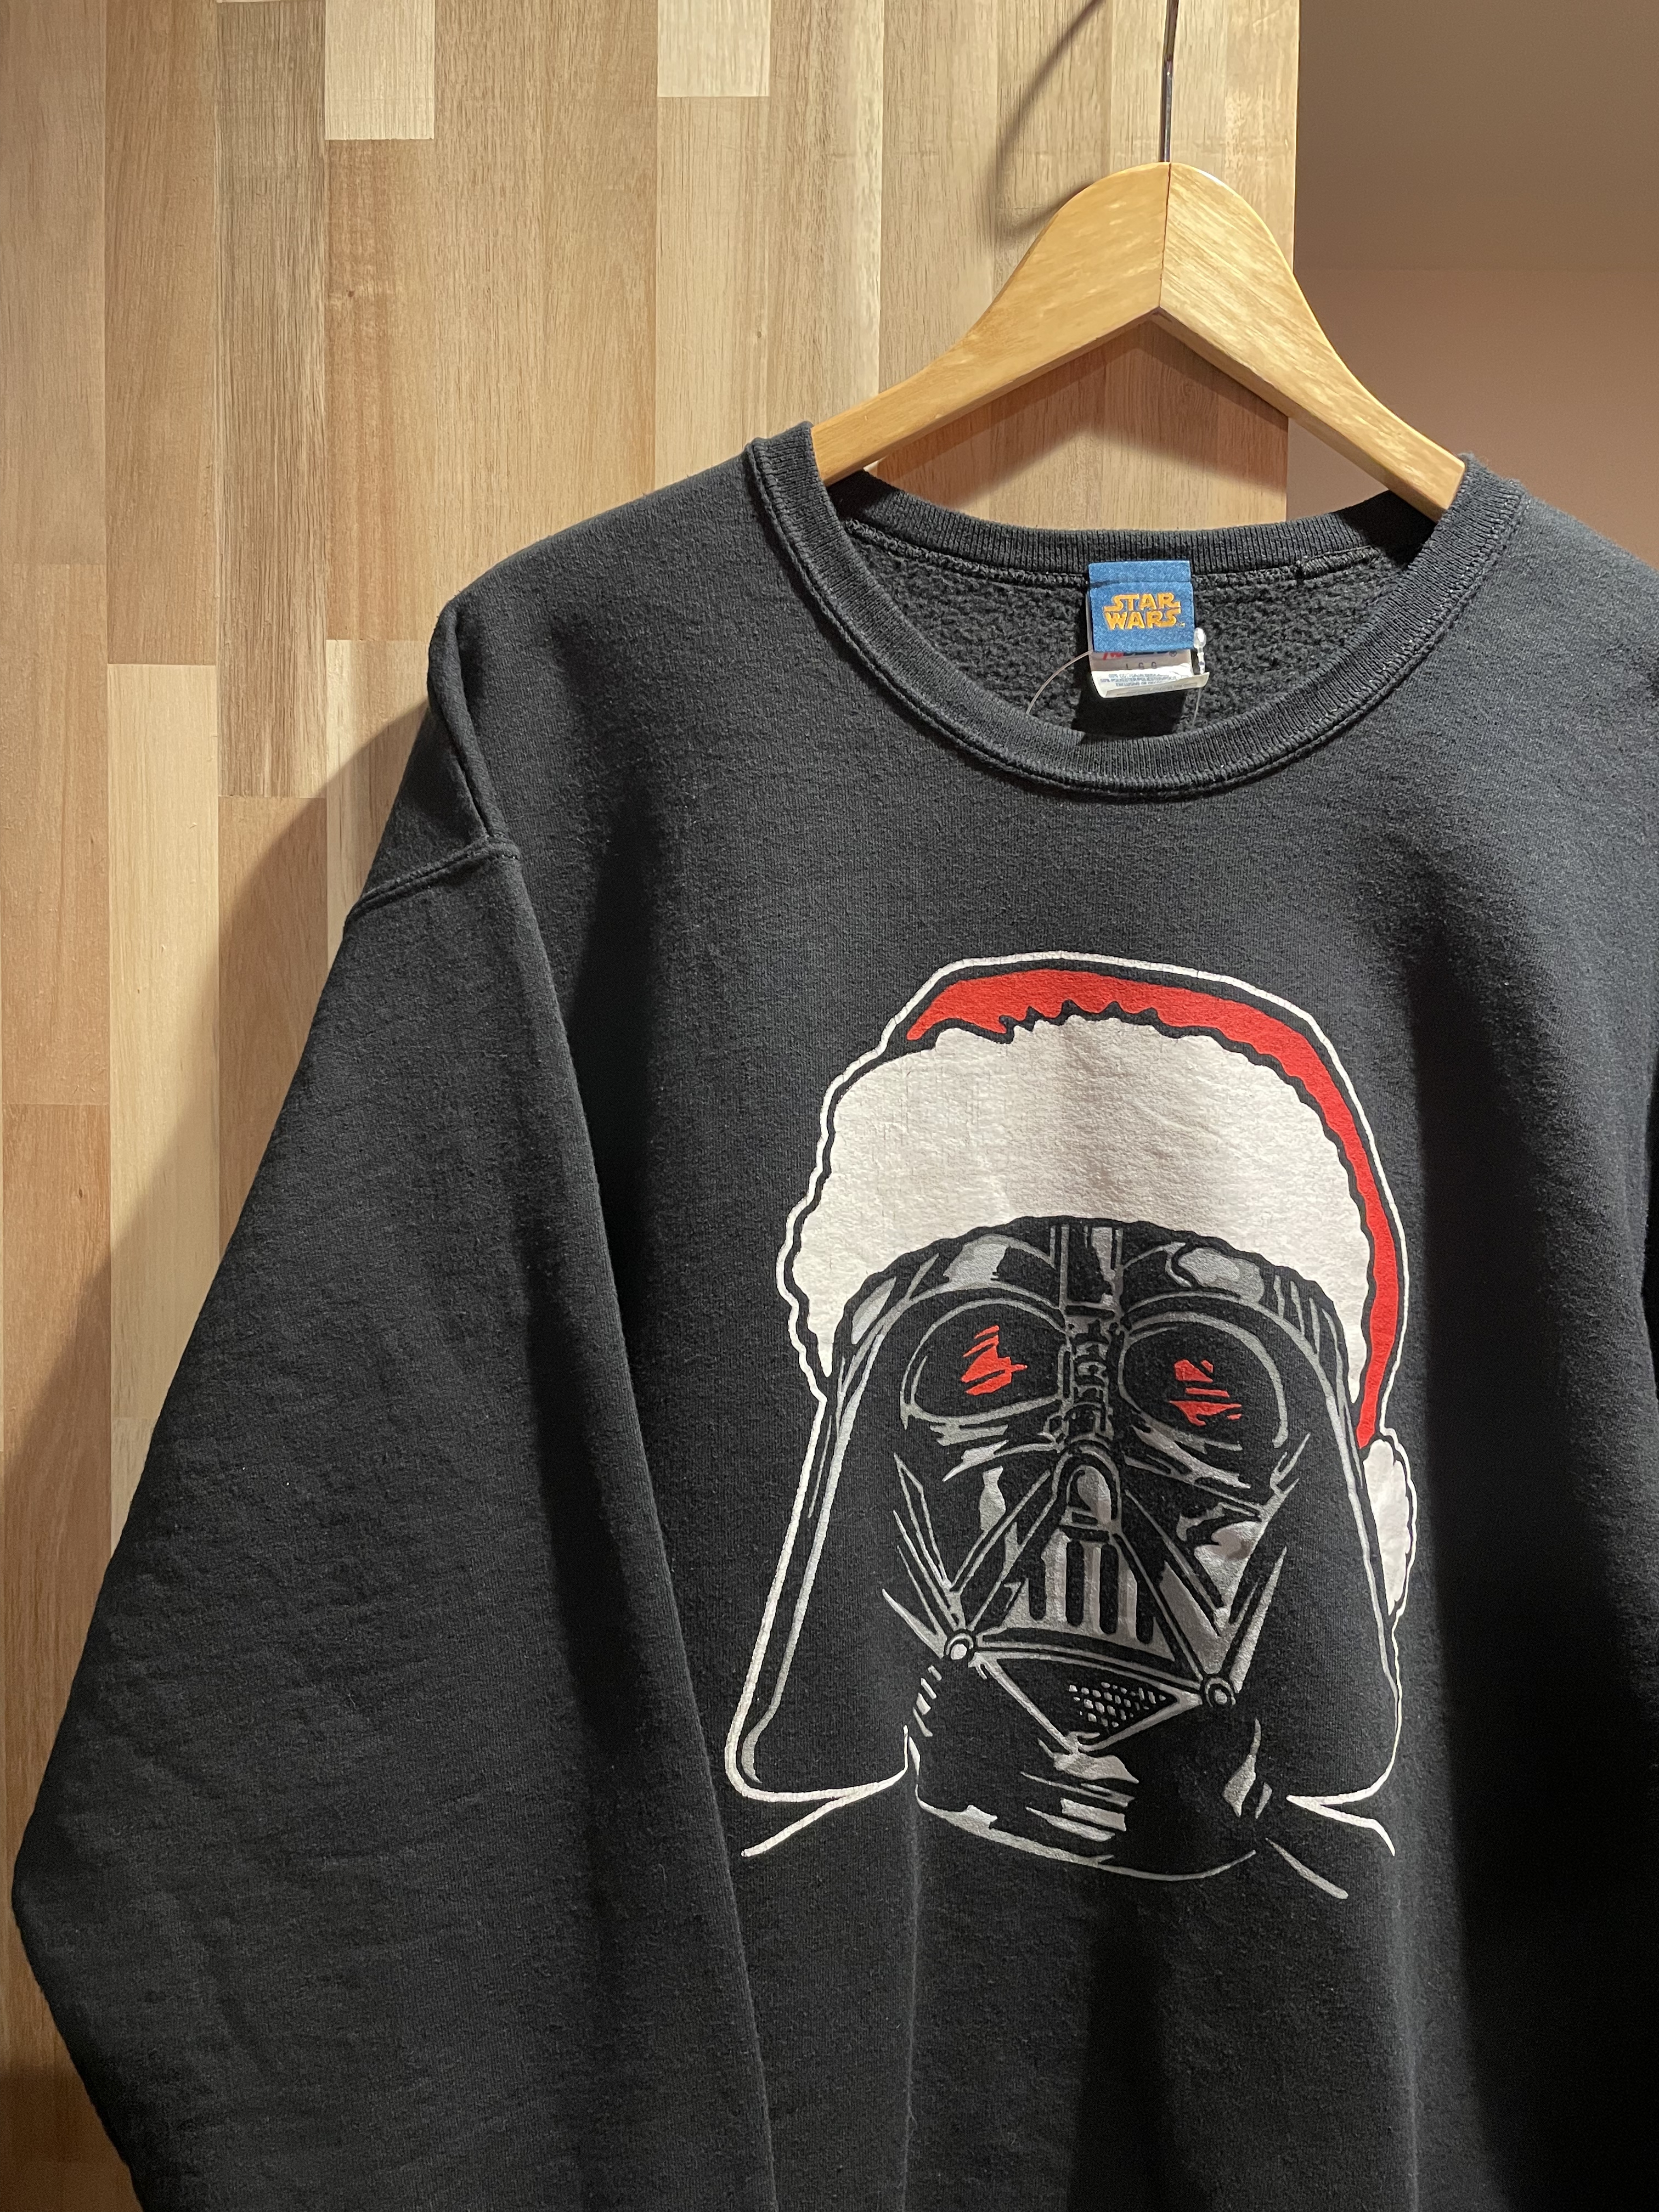 00's STARWARS×jerzees ダースベイダー スウェット A366 | Vintage.City